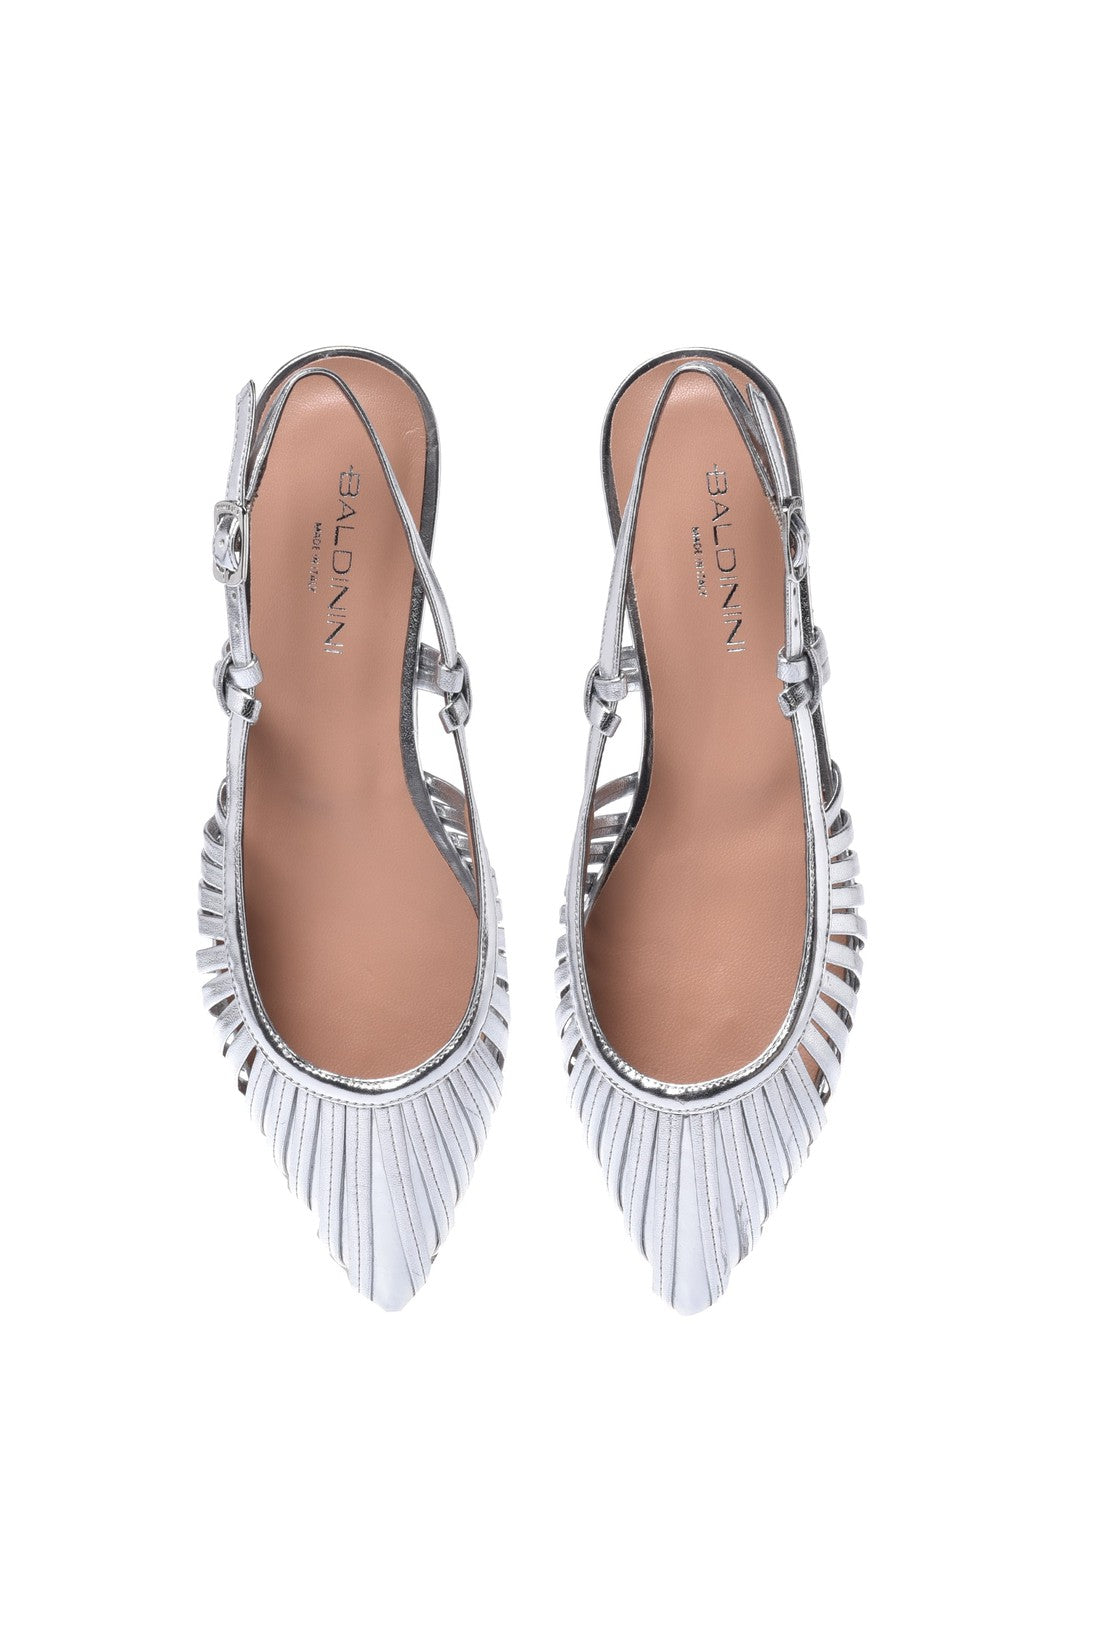 BALDININI-OUTLET-SALE-Ballerina-pump-in-silver-laminated-nappa-leather-Halbschuhe-ARCHIVE-COLLECTION-2_40c6c042-d395-434d-a583-92961ef85562.jpg